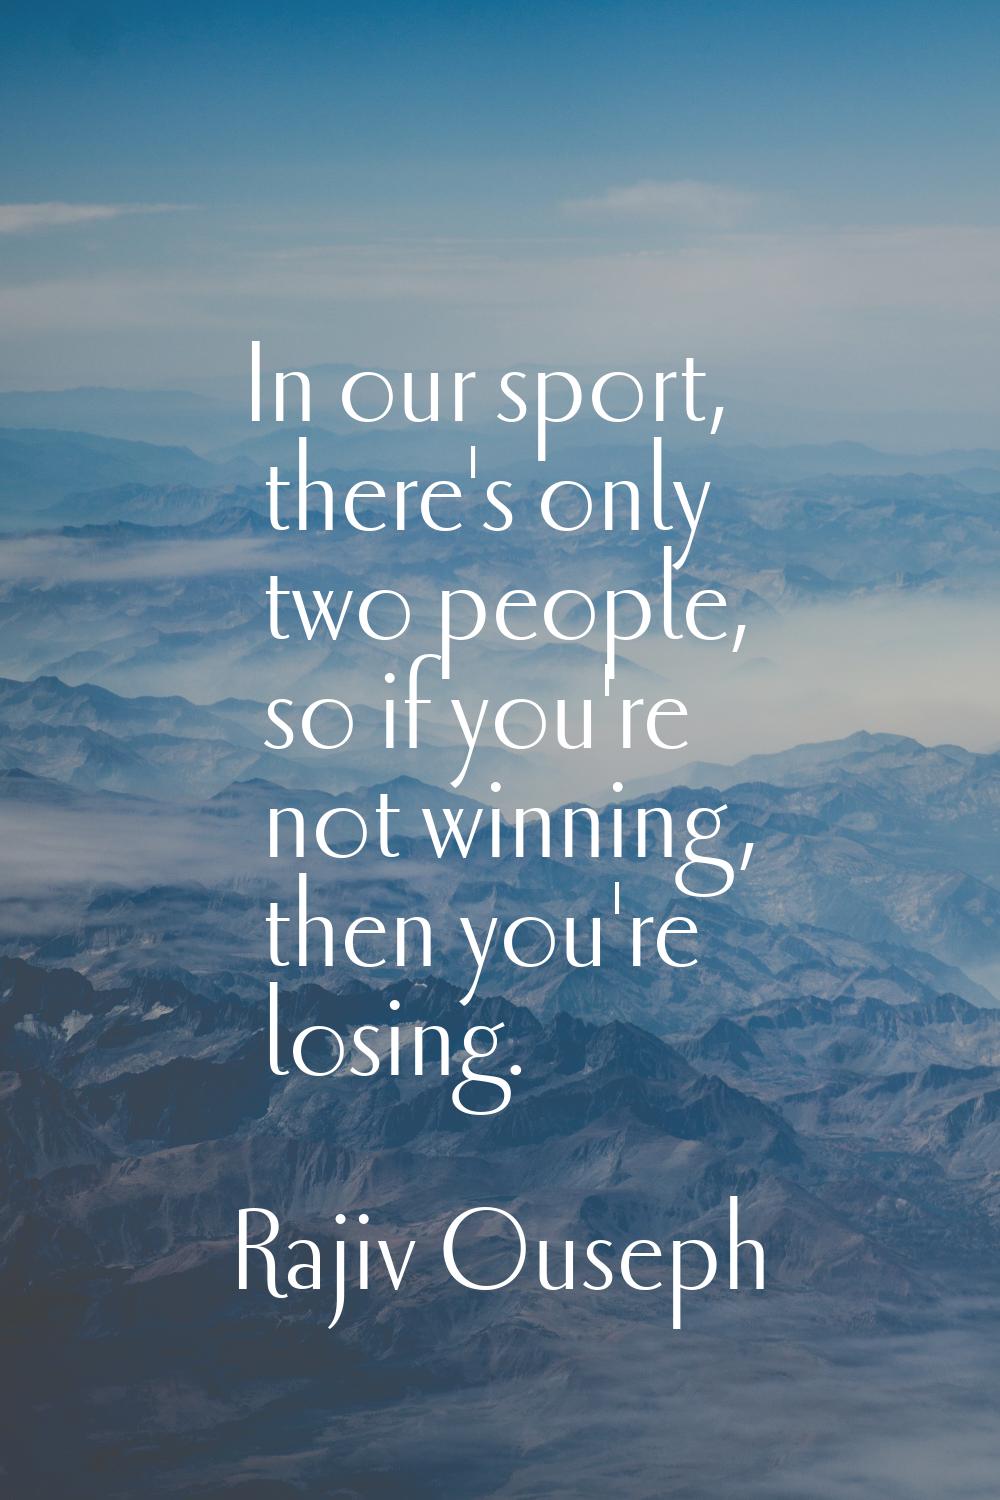 In our sport, there's only two people, so if you're not winning, then you're losing.